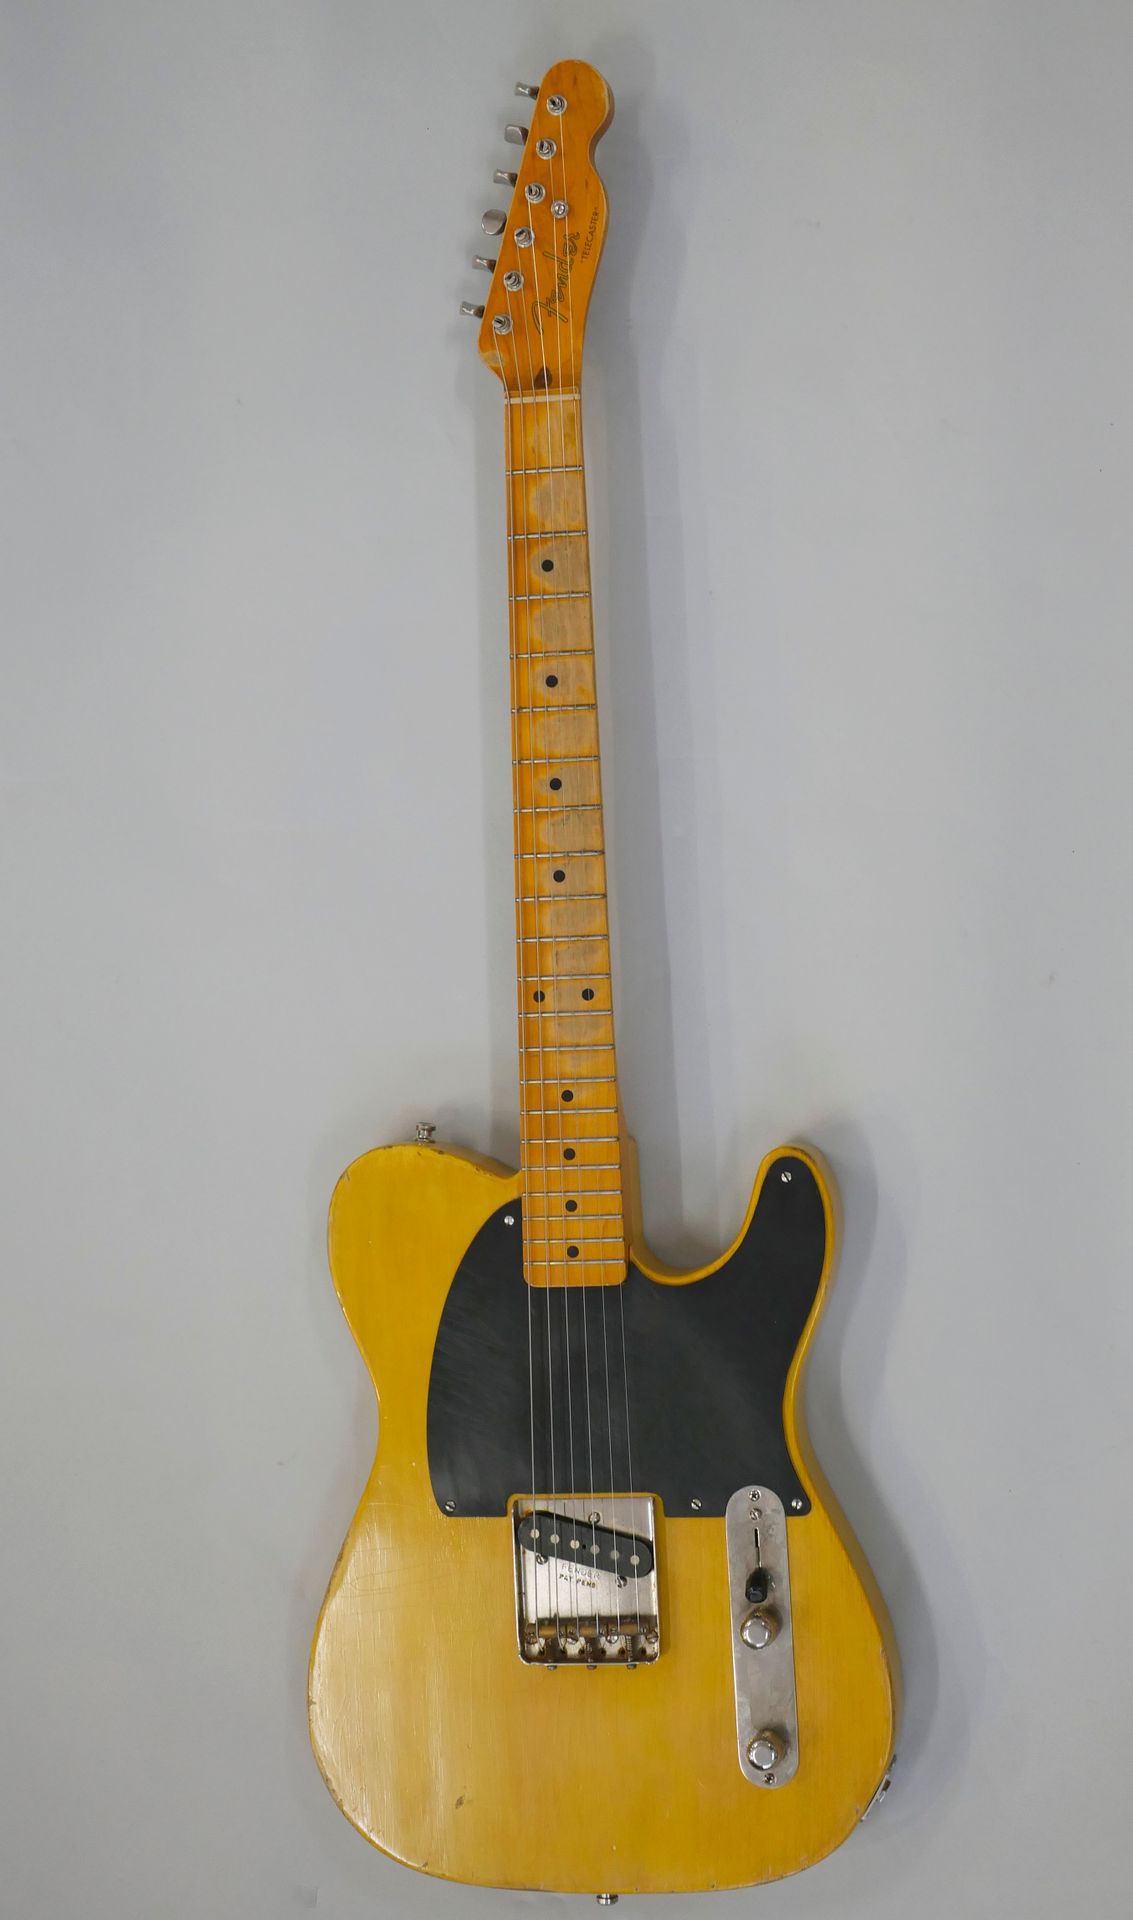 Null Solidbody electric guitar Telecaster model in copy of a Fender made in Guit&hellip;